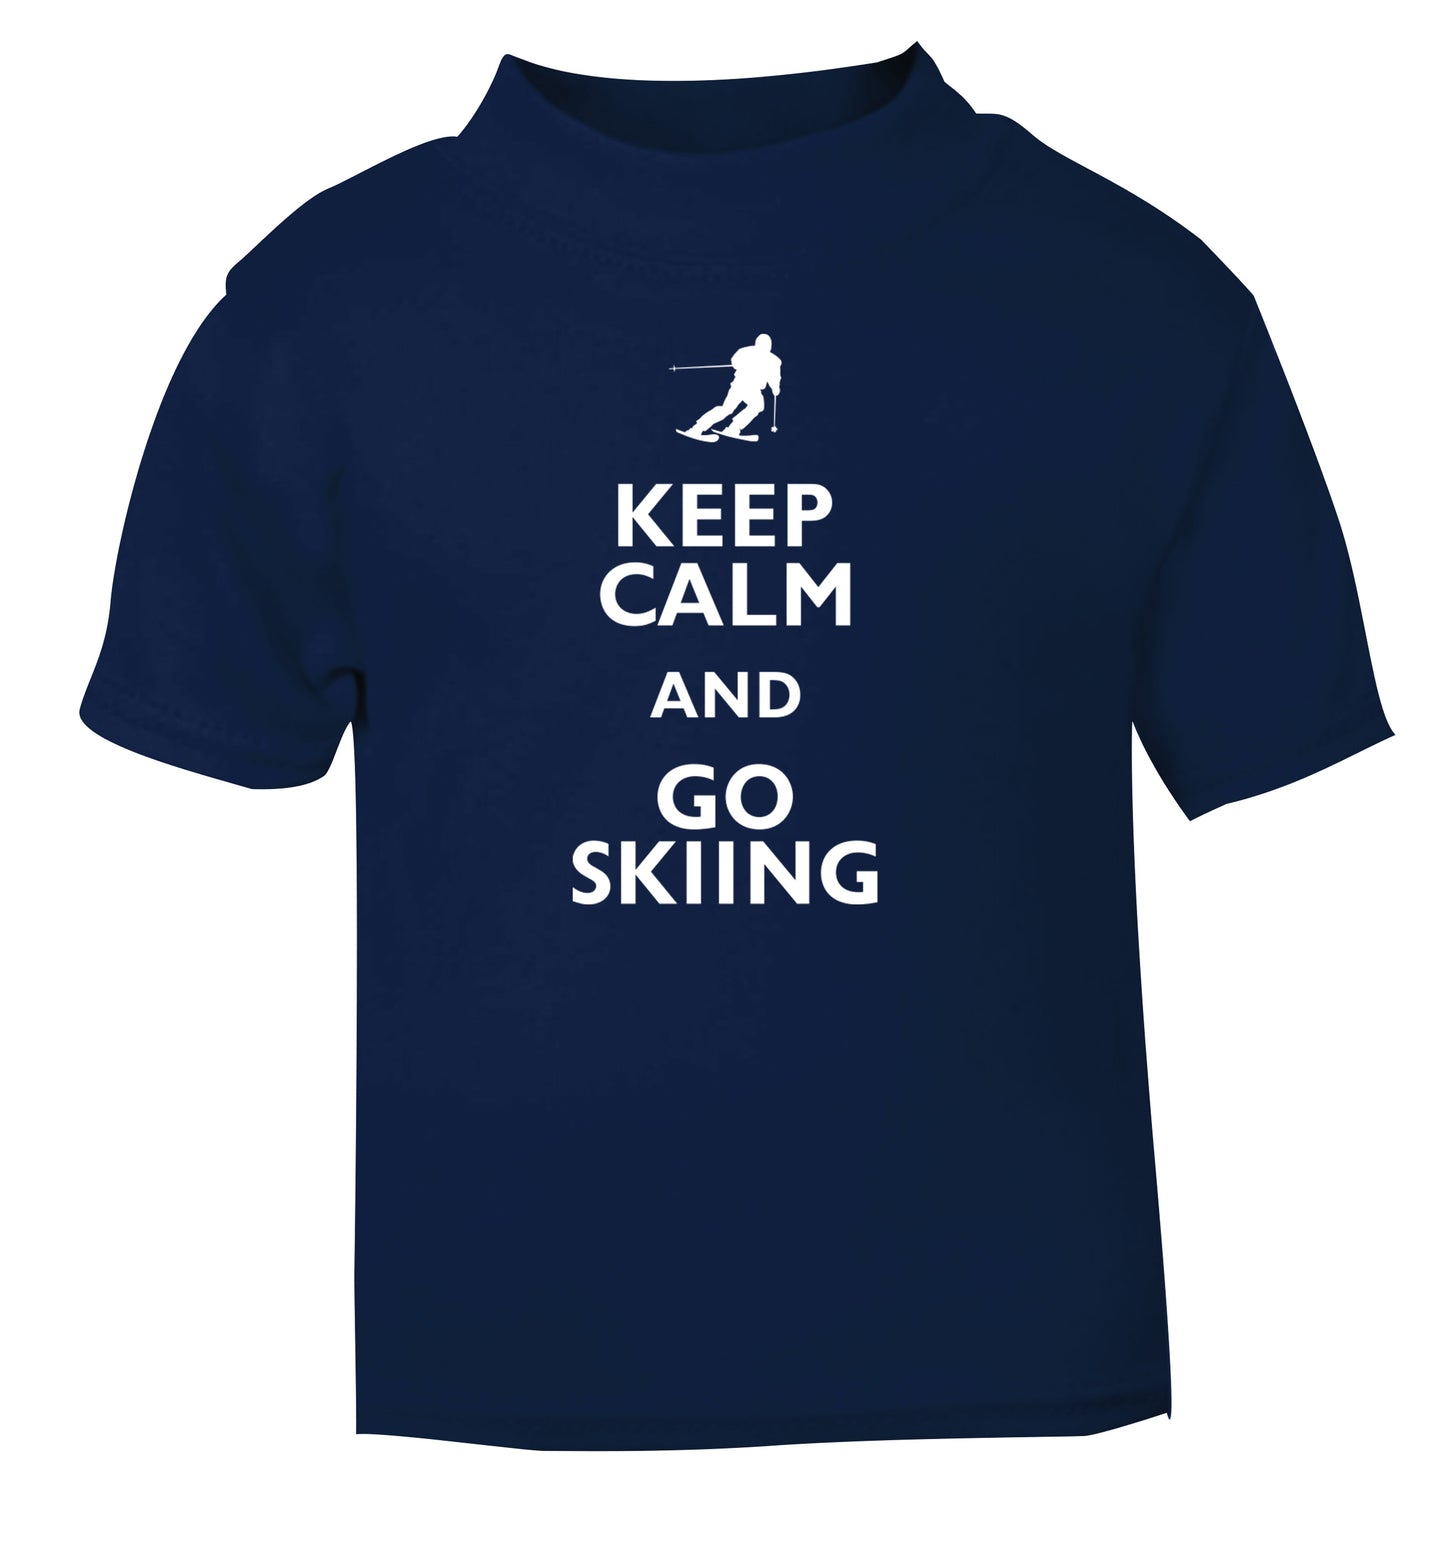 Keep calm and go skiing navy Baby Toddler Tshirt 2 Years